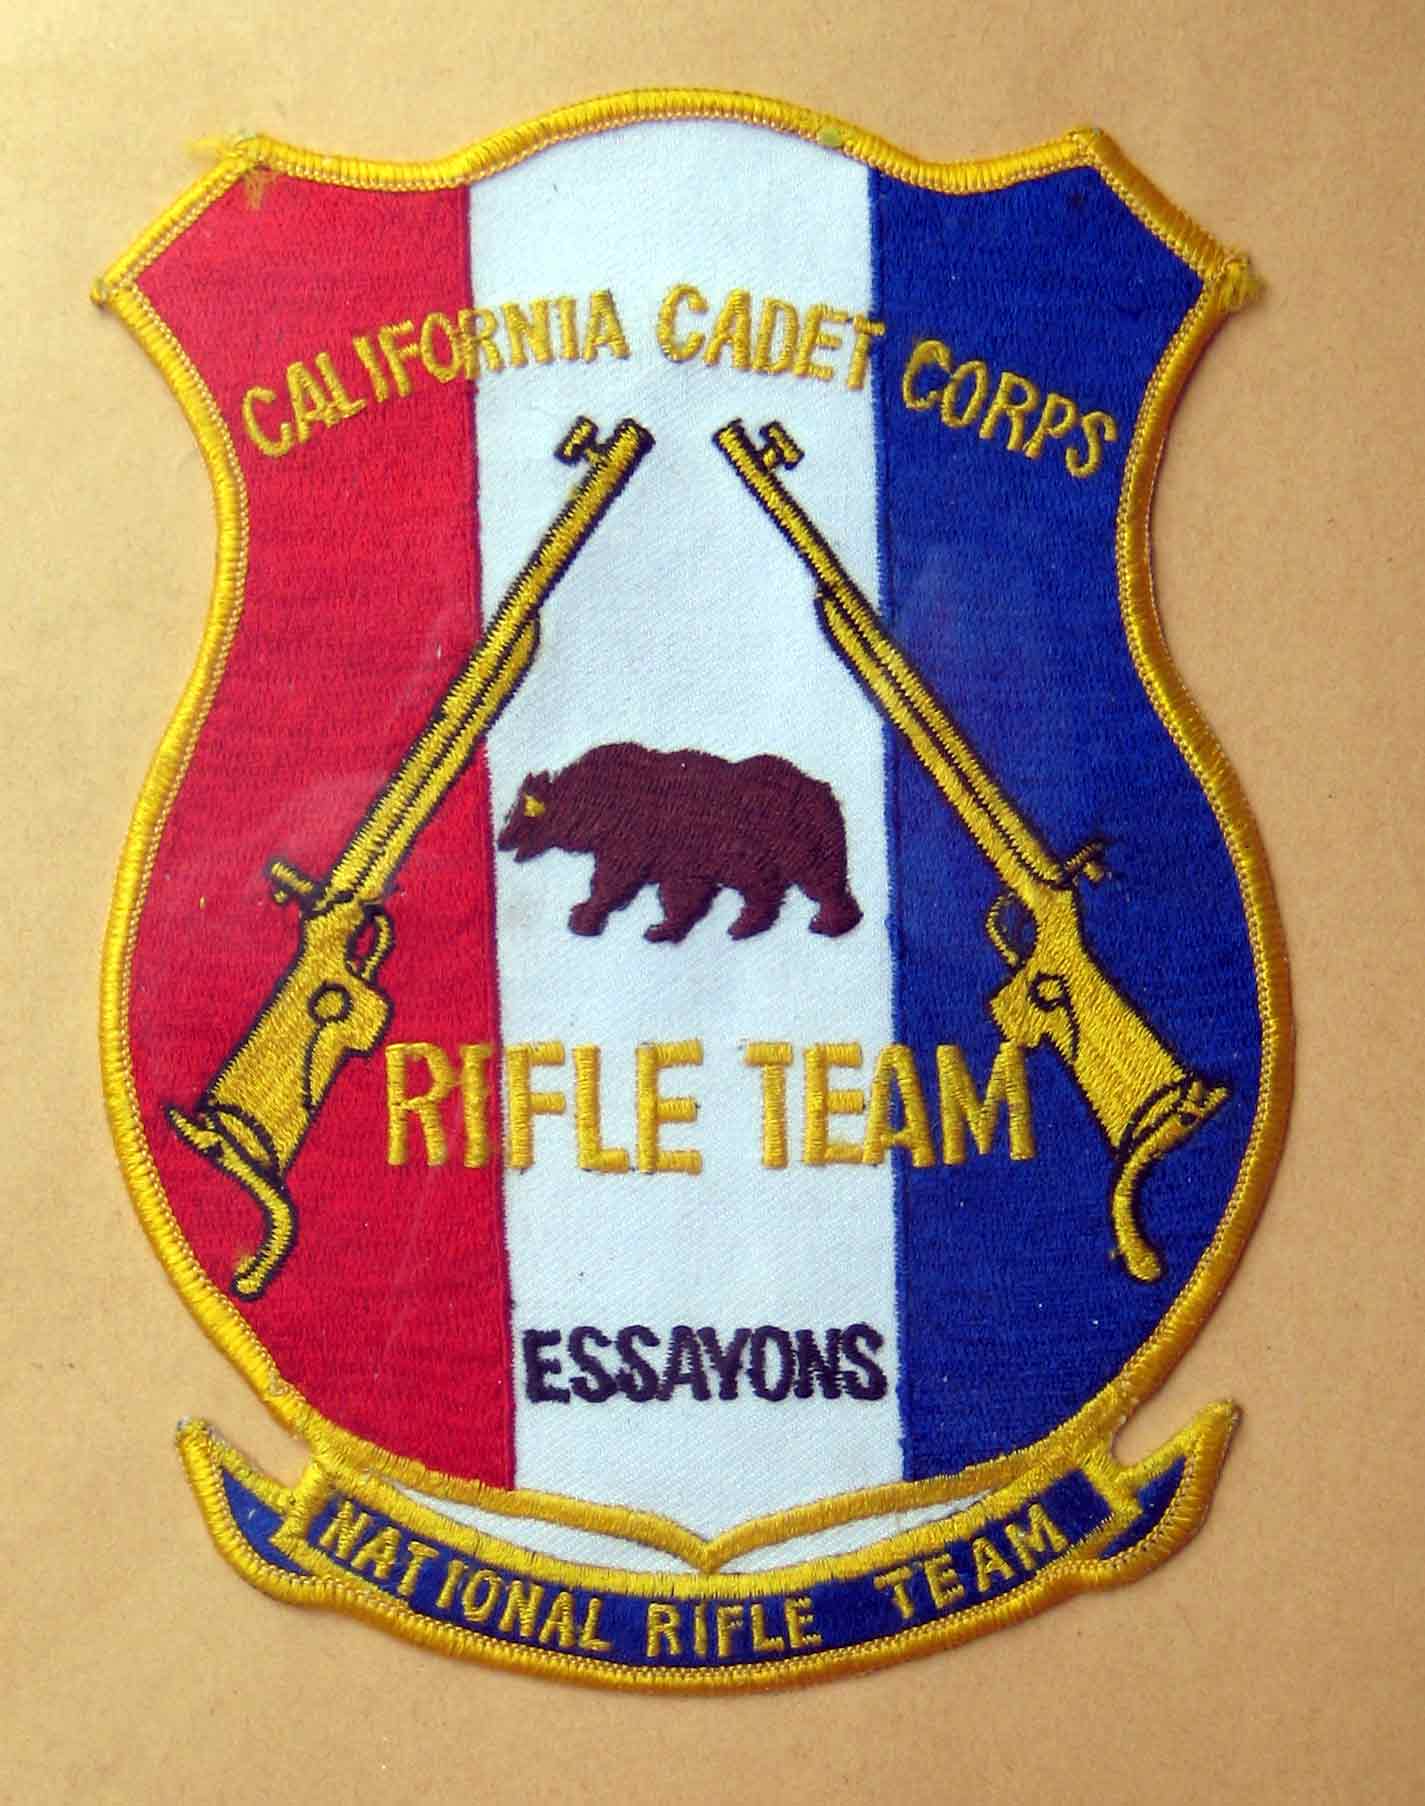 Patche presented to members of the California Cadet Corps National Rifle Team